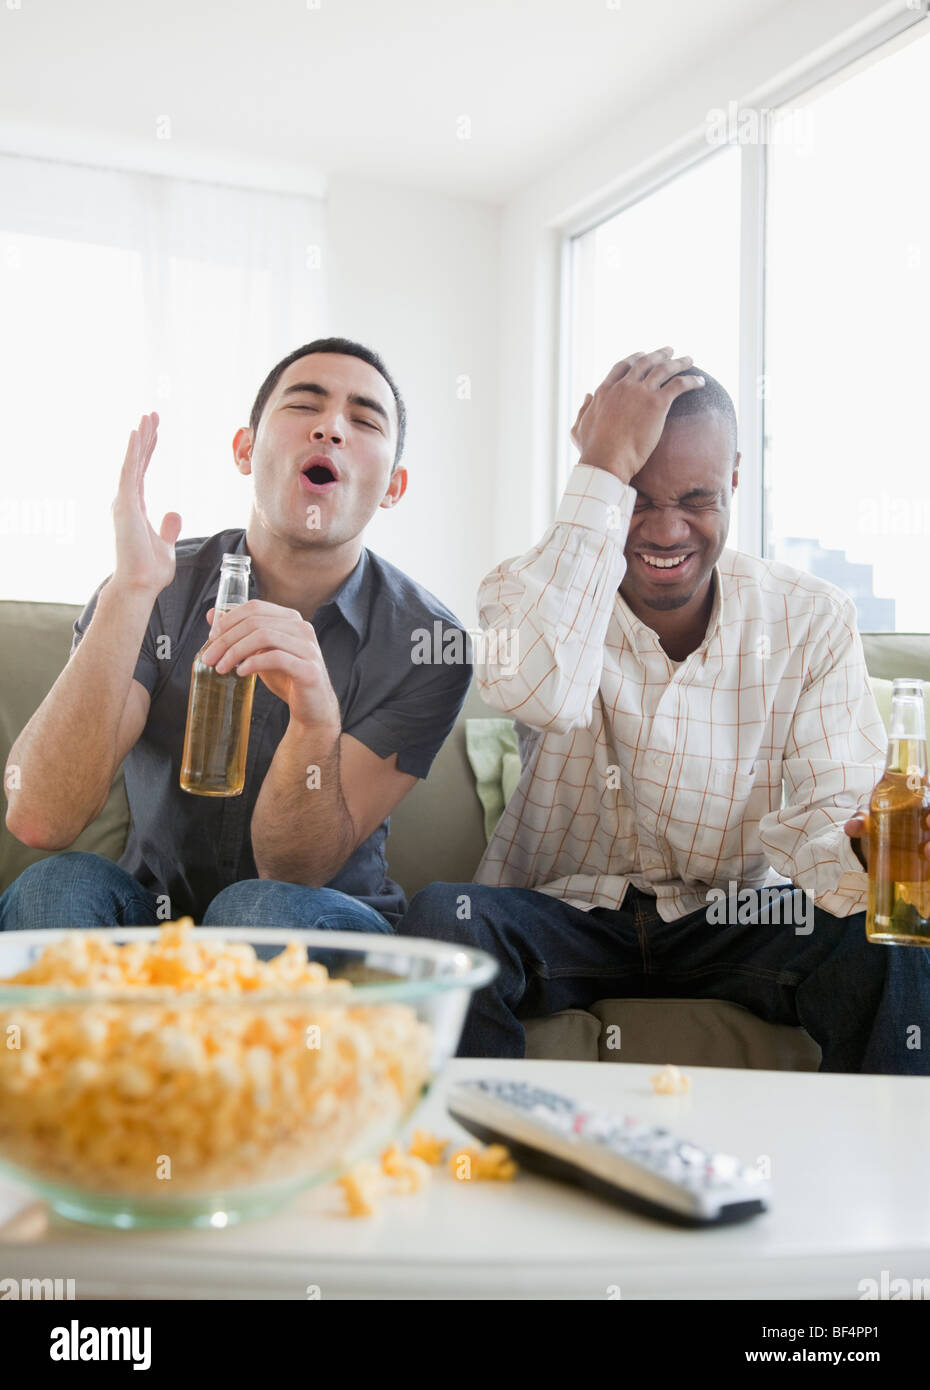 Men drinking beer and watching sports on television Stock Photo